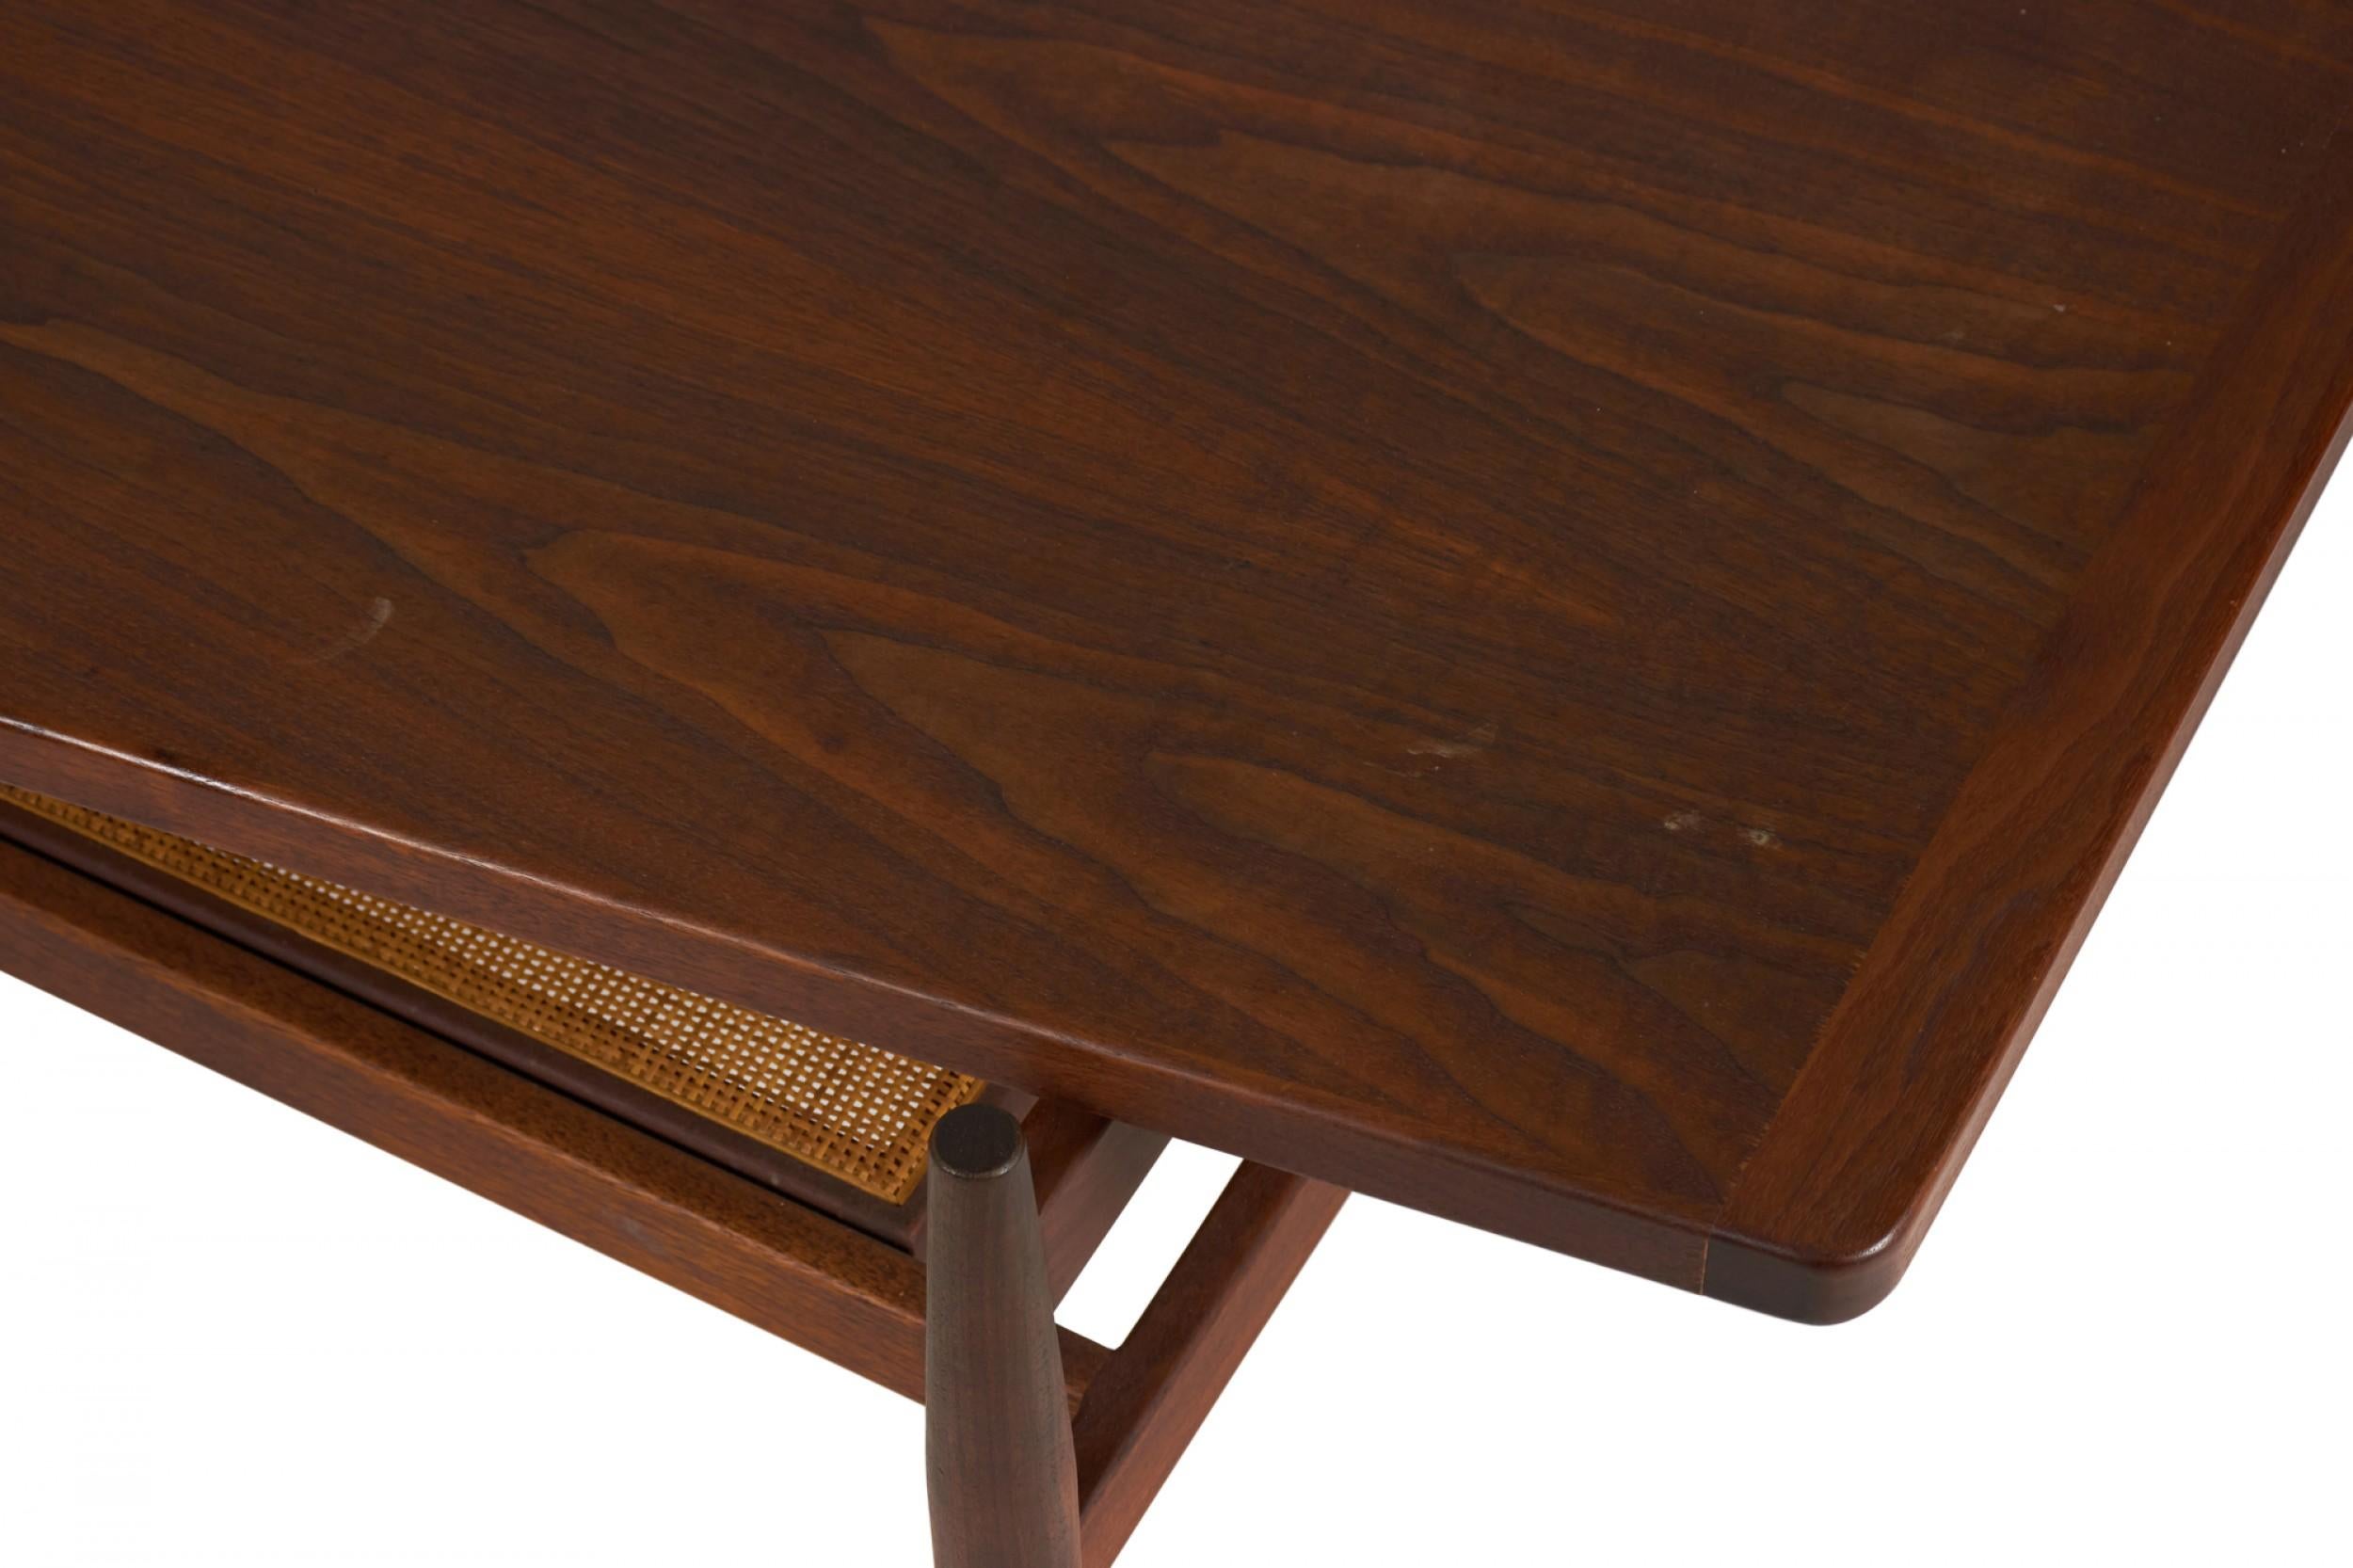 Jens Risom Mid-Century Diamond Top Walnut and Caning Coffee Table For Sale 4